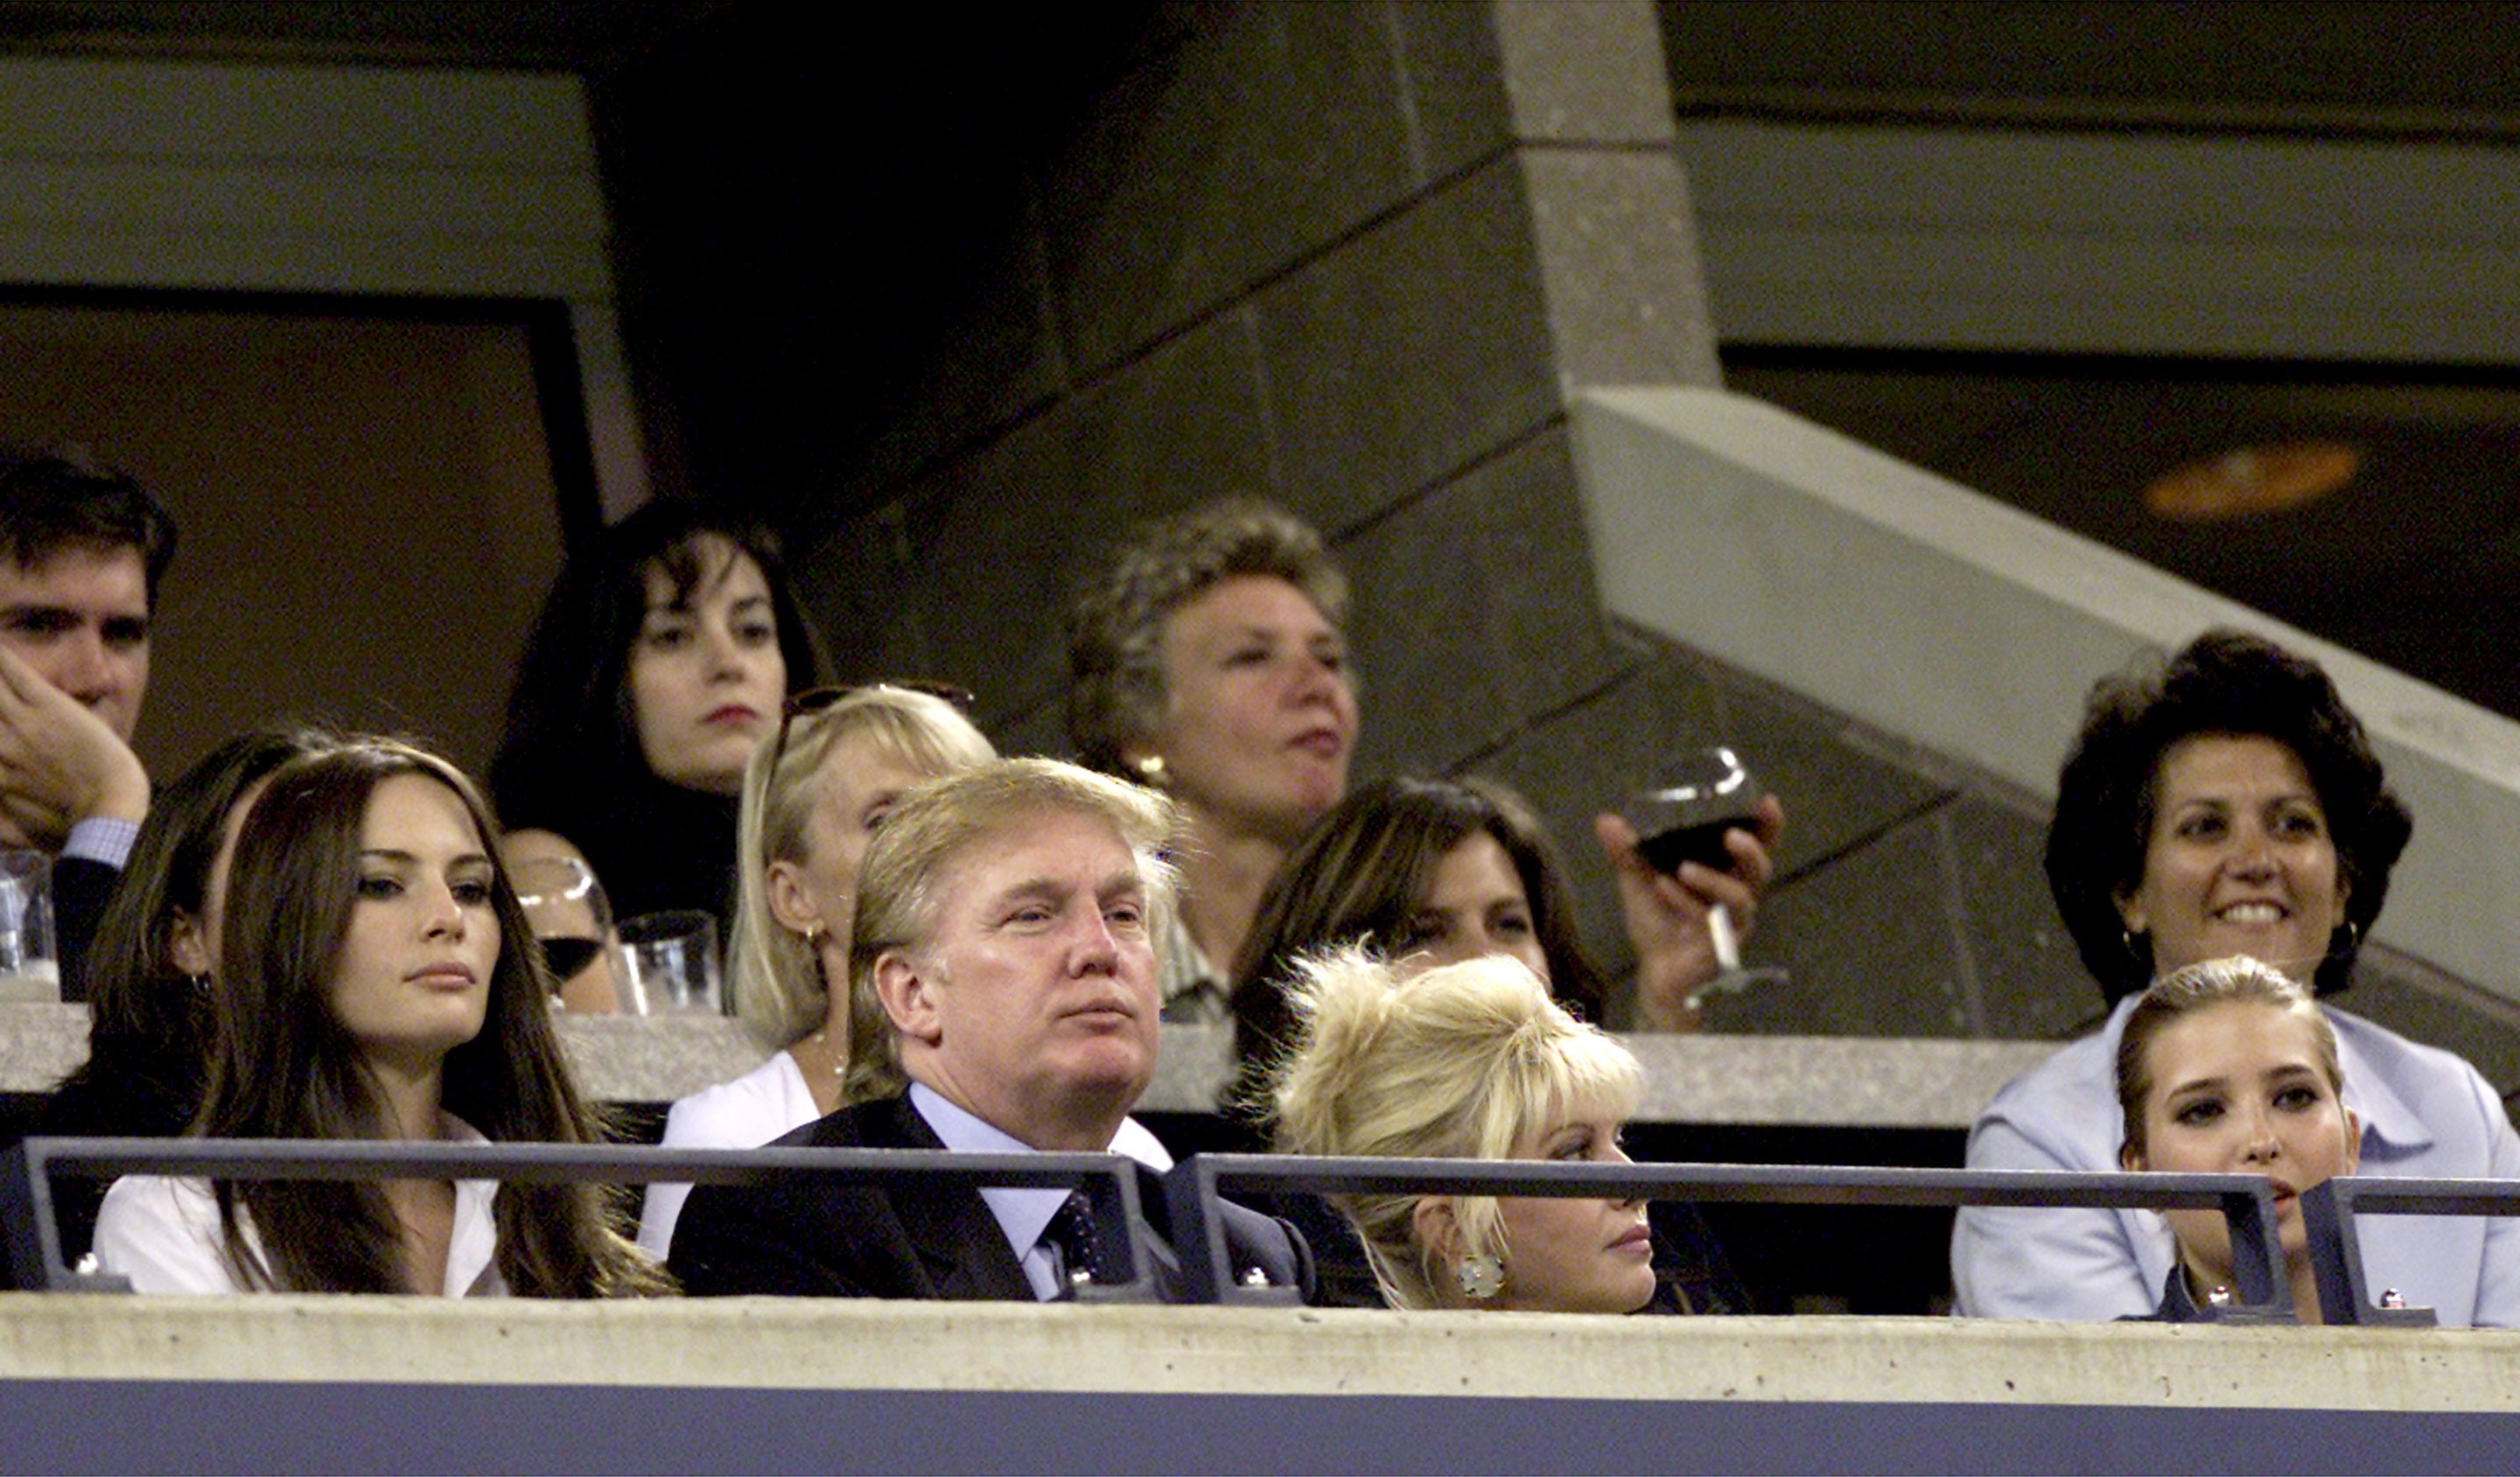 Donald Trump watches Venus and Serena Williams compete during the women's final match of the US Open with his girlfriend Melania Knauss (L), his ex-wife Ivana Trump and their daughter Ivanka (R) September 8, 2001 at the USTA National Tennis Center in Flushing, NY.